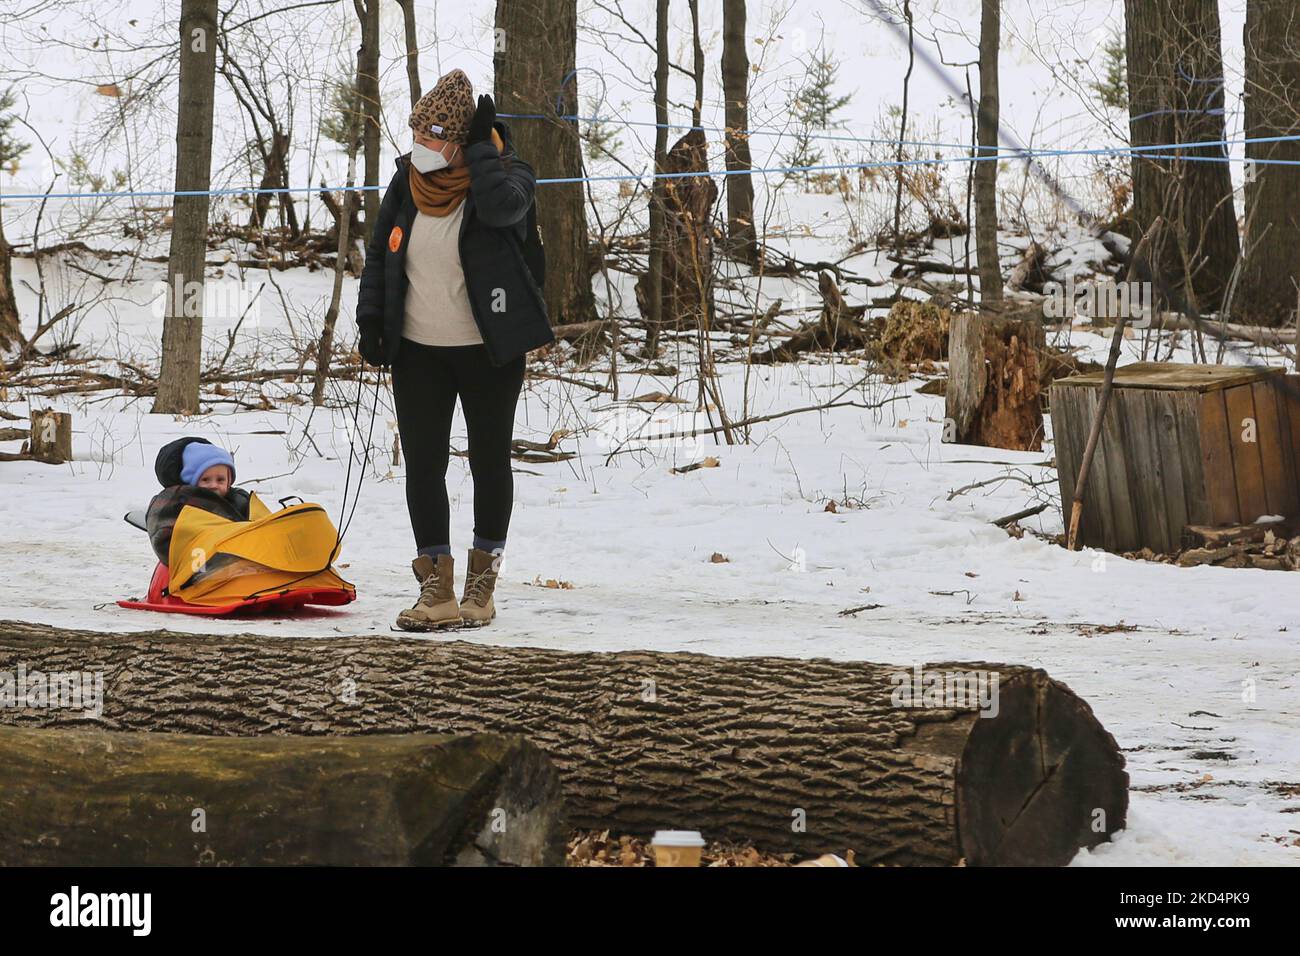 Woman pulls her child on a small sled through the sugarbush as they vist a maple syrup farm during the Maple Sugar Festival in Mount Albert, Ontario, Canada, on March 05, 2022. The Maple Sugar Festival celebrates maple syrup production and products made with maple syrup and takes part at many maple syrup producing farms across Ontario and Quebec. Maple syrup is only produced in North America. (Photo by Creative Touch Imaging Ltd./NurPhoto) Stock Photo